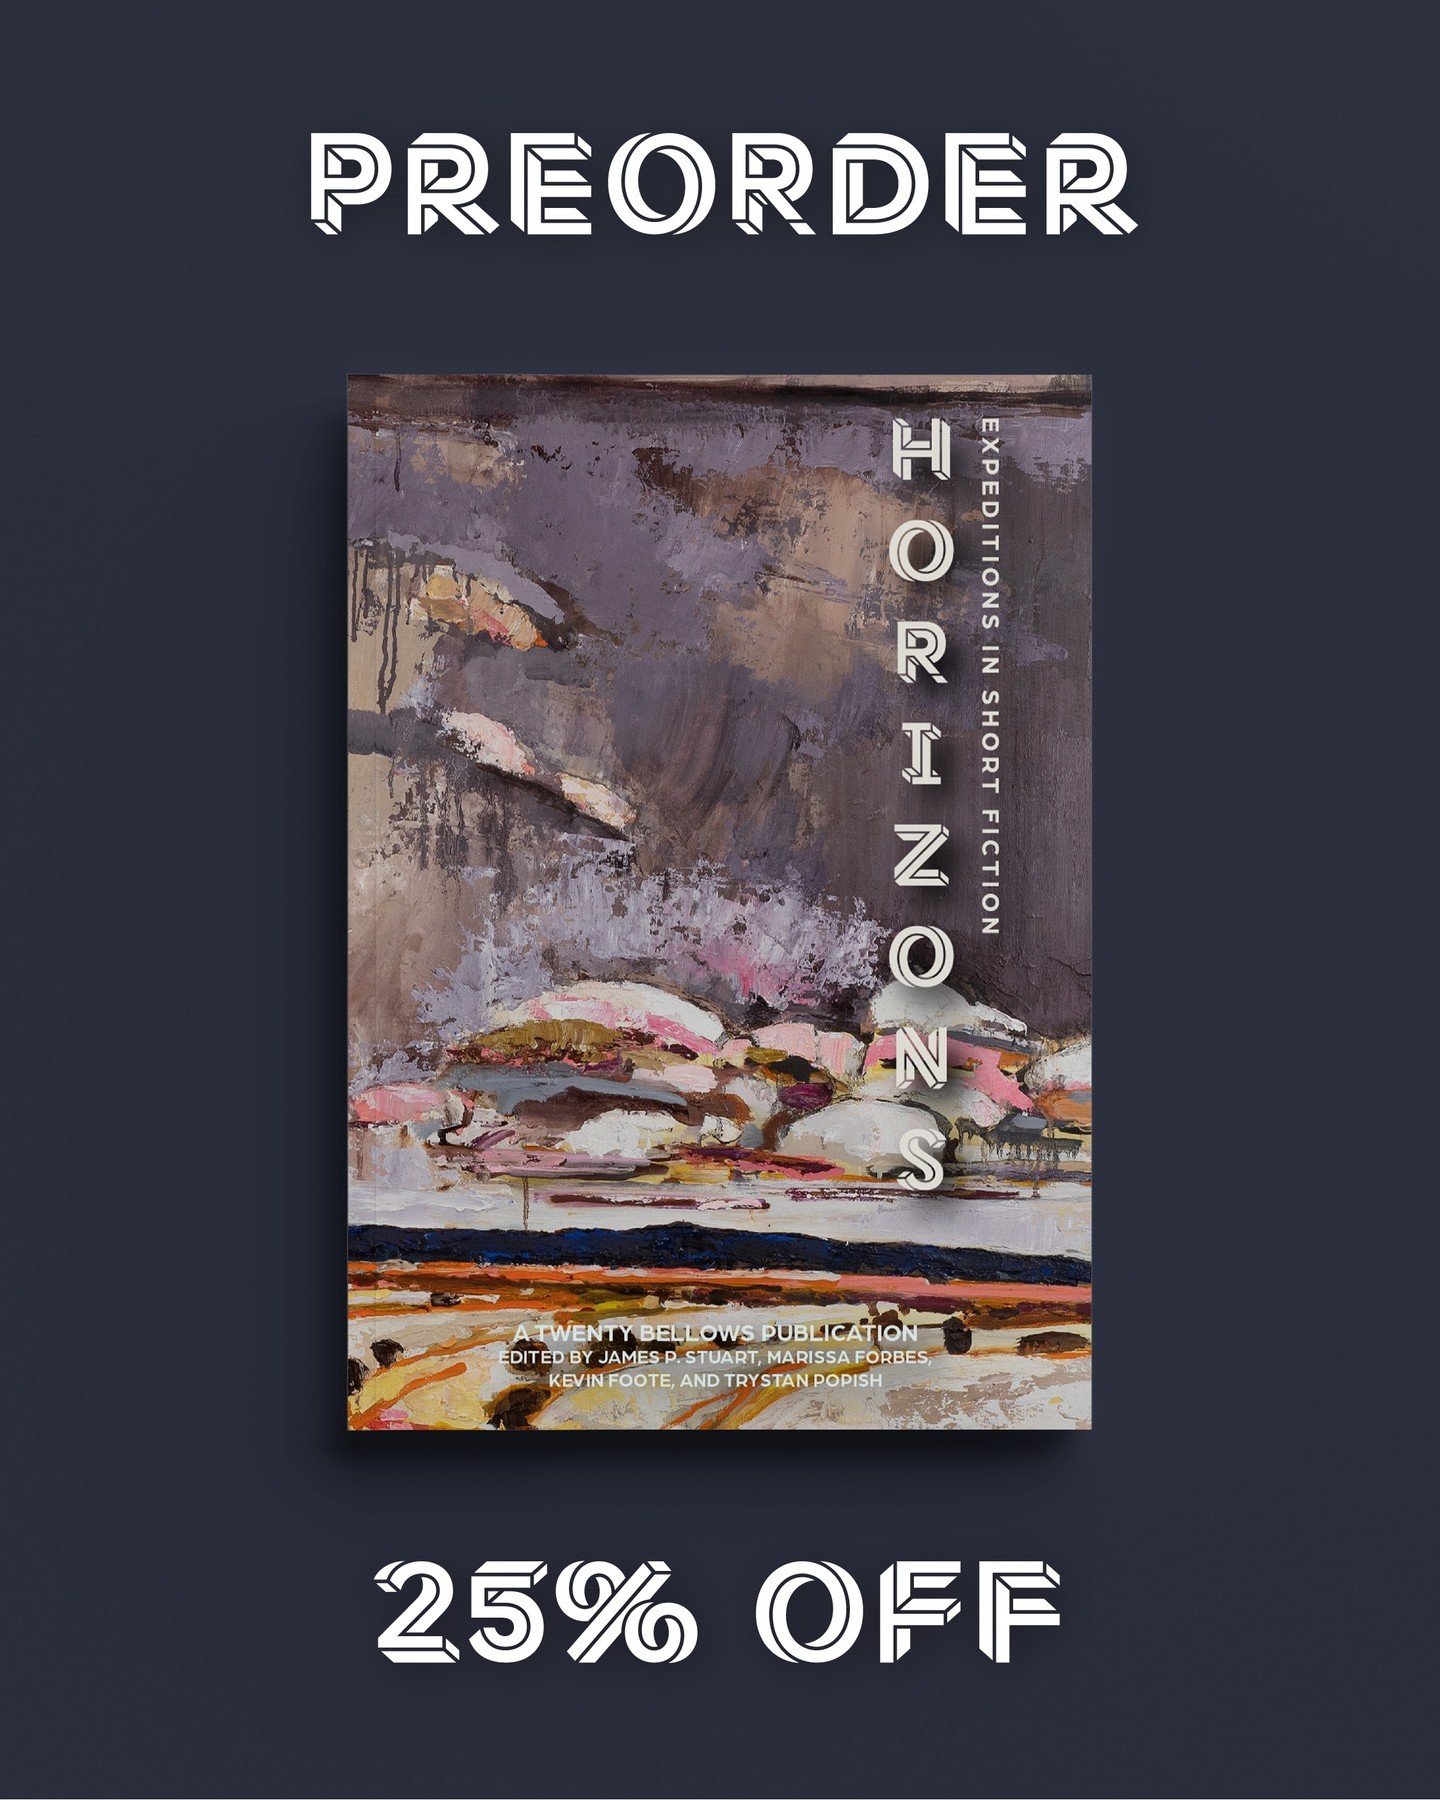 #PREORDER: It's almost here! The final proofs have been approved and we are very near to announcing a final publication date for &quot;HORIZONS: Expeditions in Short Fiction.&quot; 

Want to be among the first to get your hands on a copy (and save so